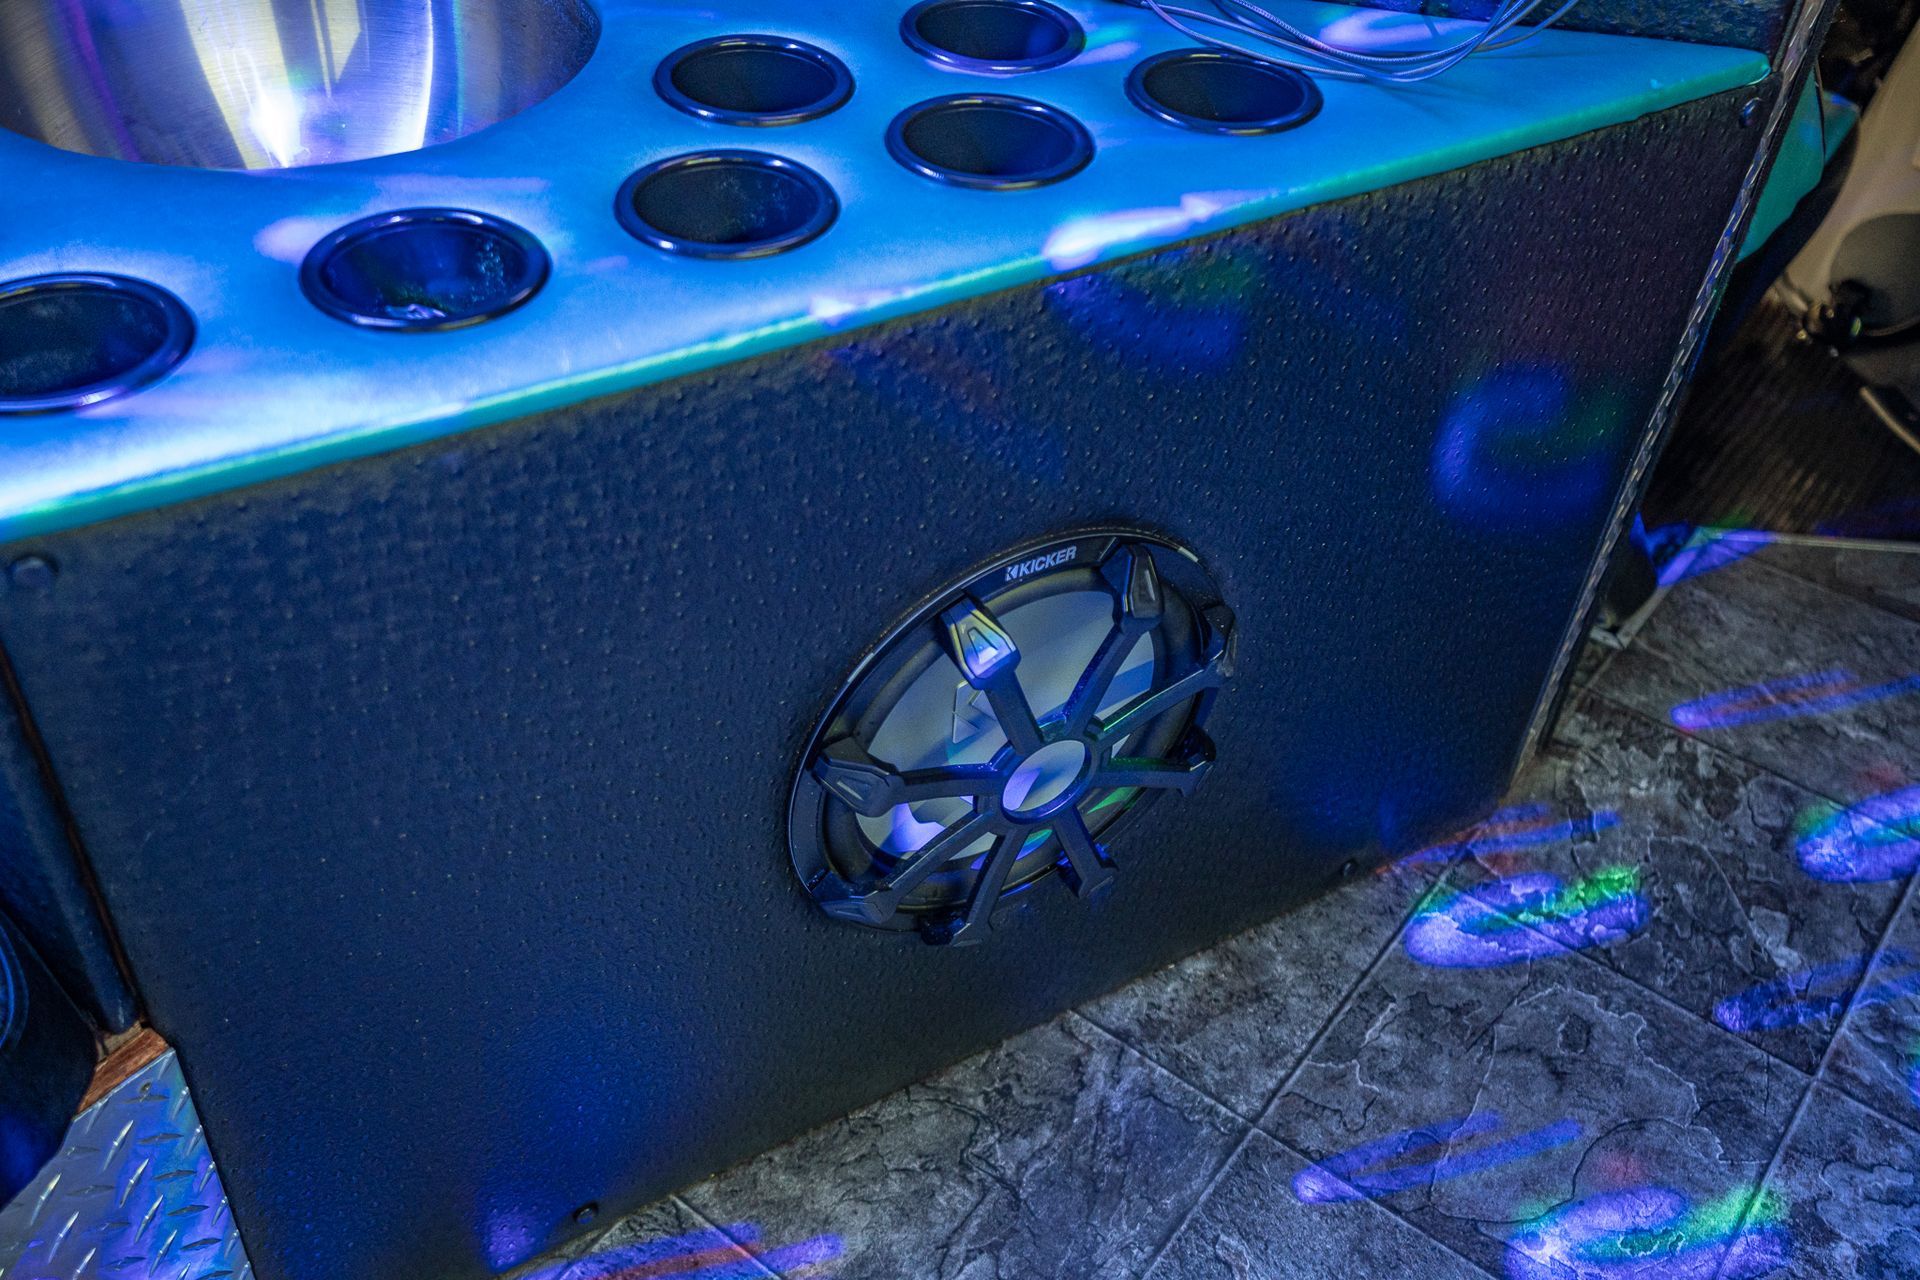 A blue speaker is sitting on a tiled floor in a room.